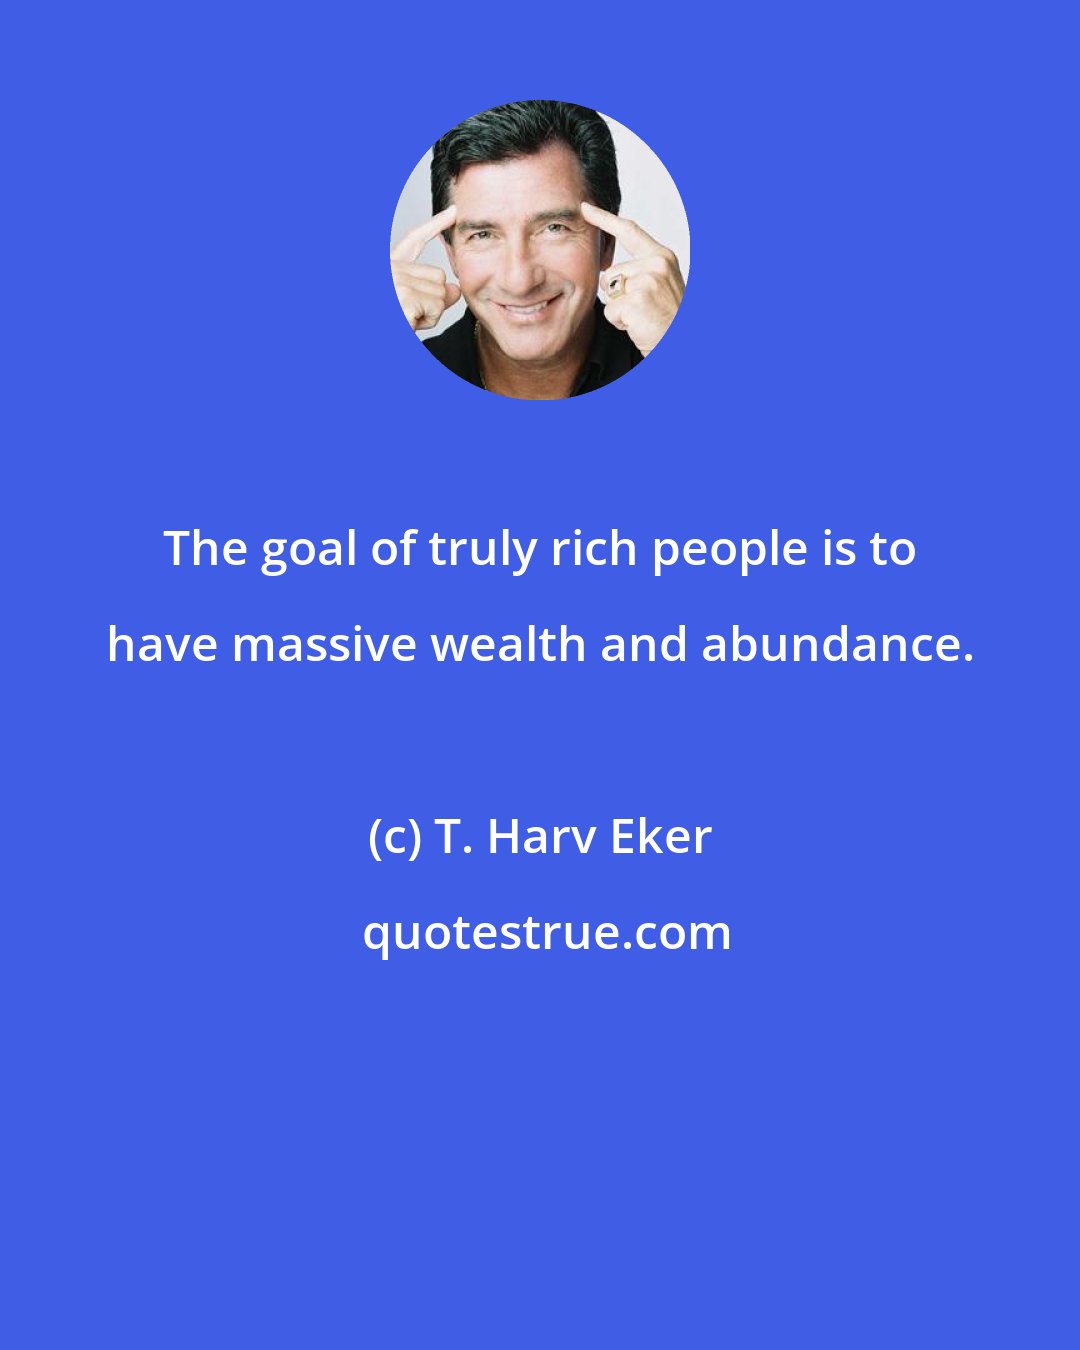 T. Harv Eker: The goal of truly rich people is to have massive wealth and abundance.